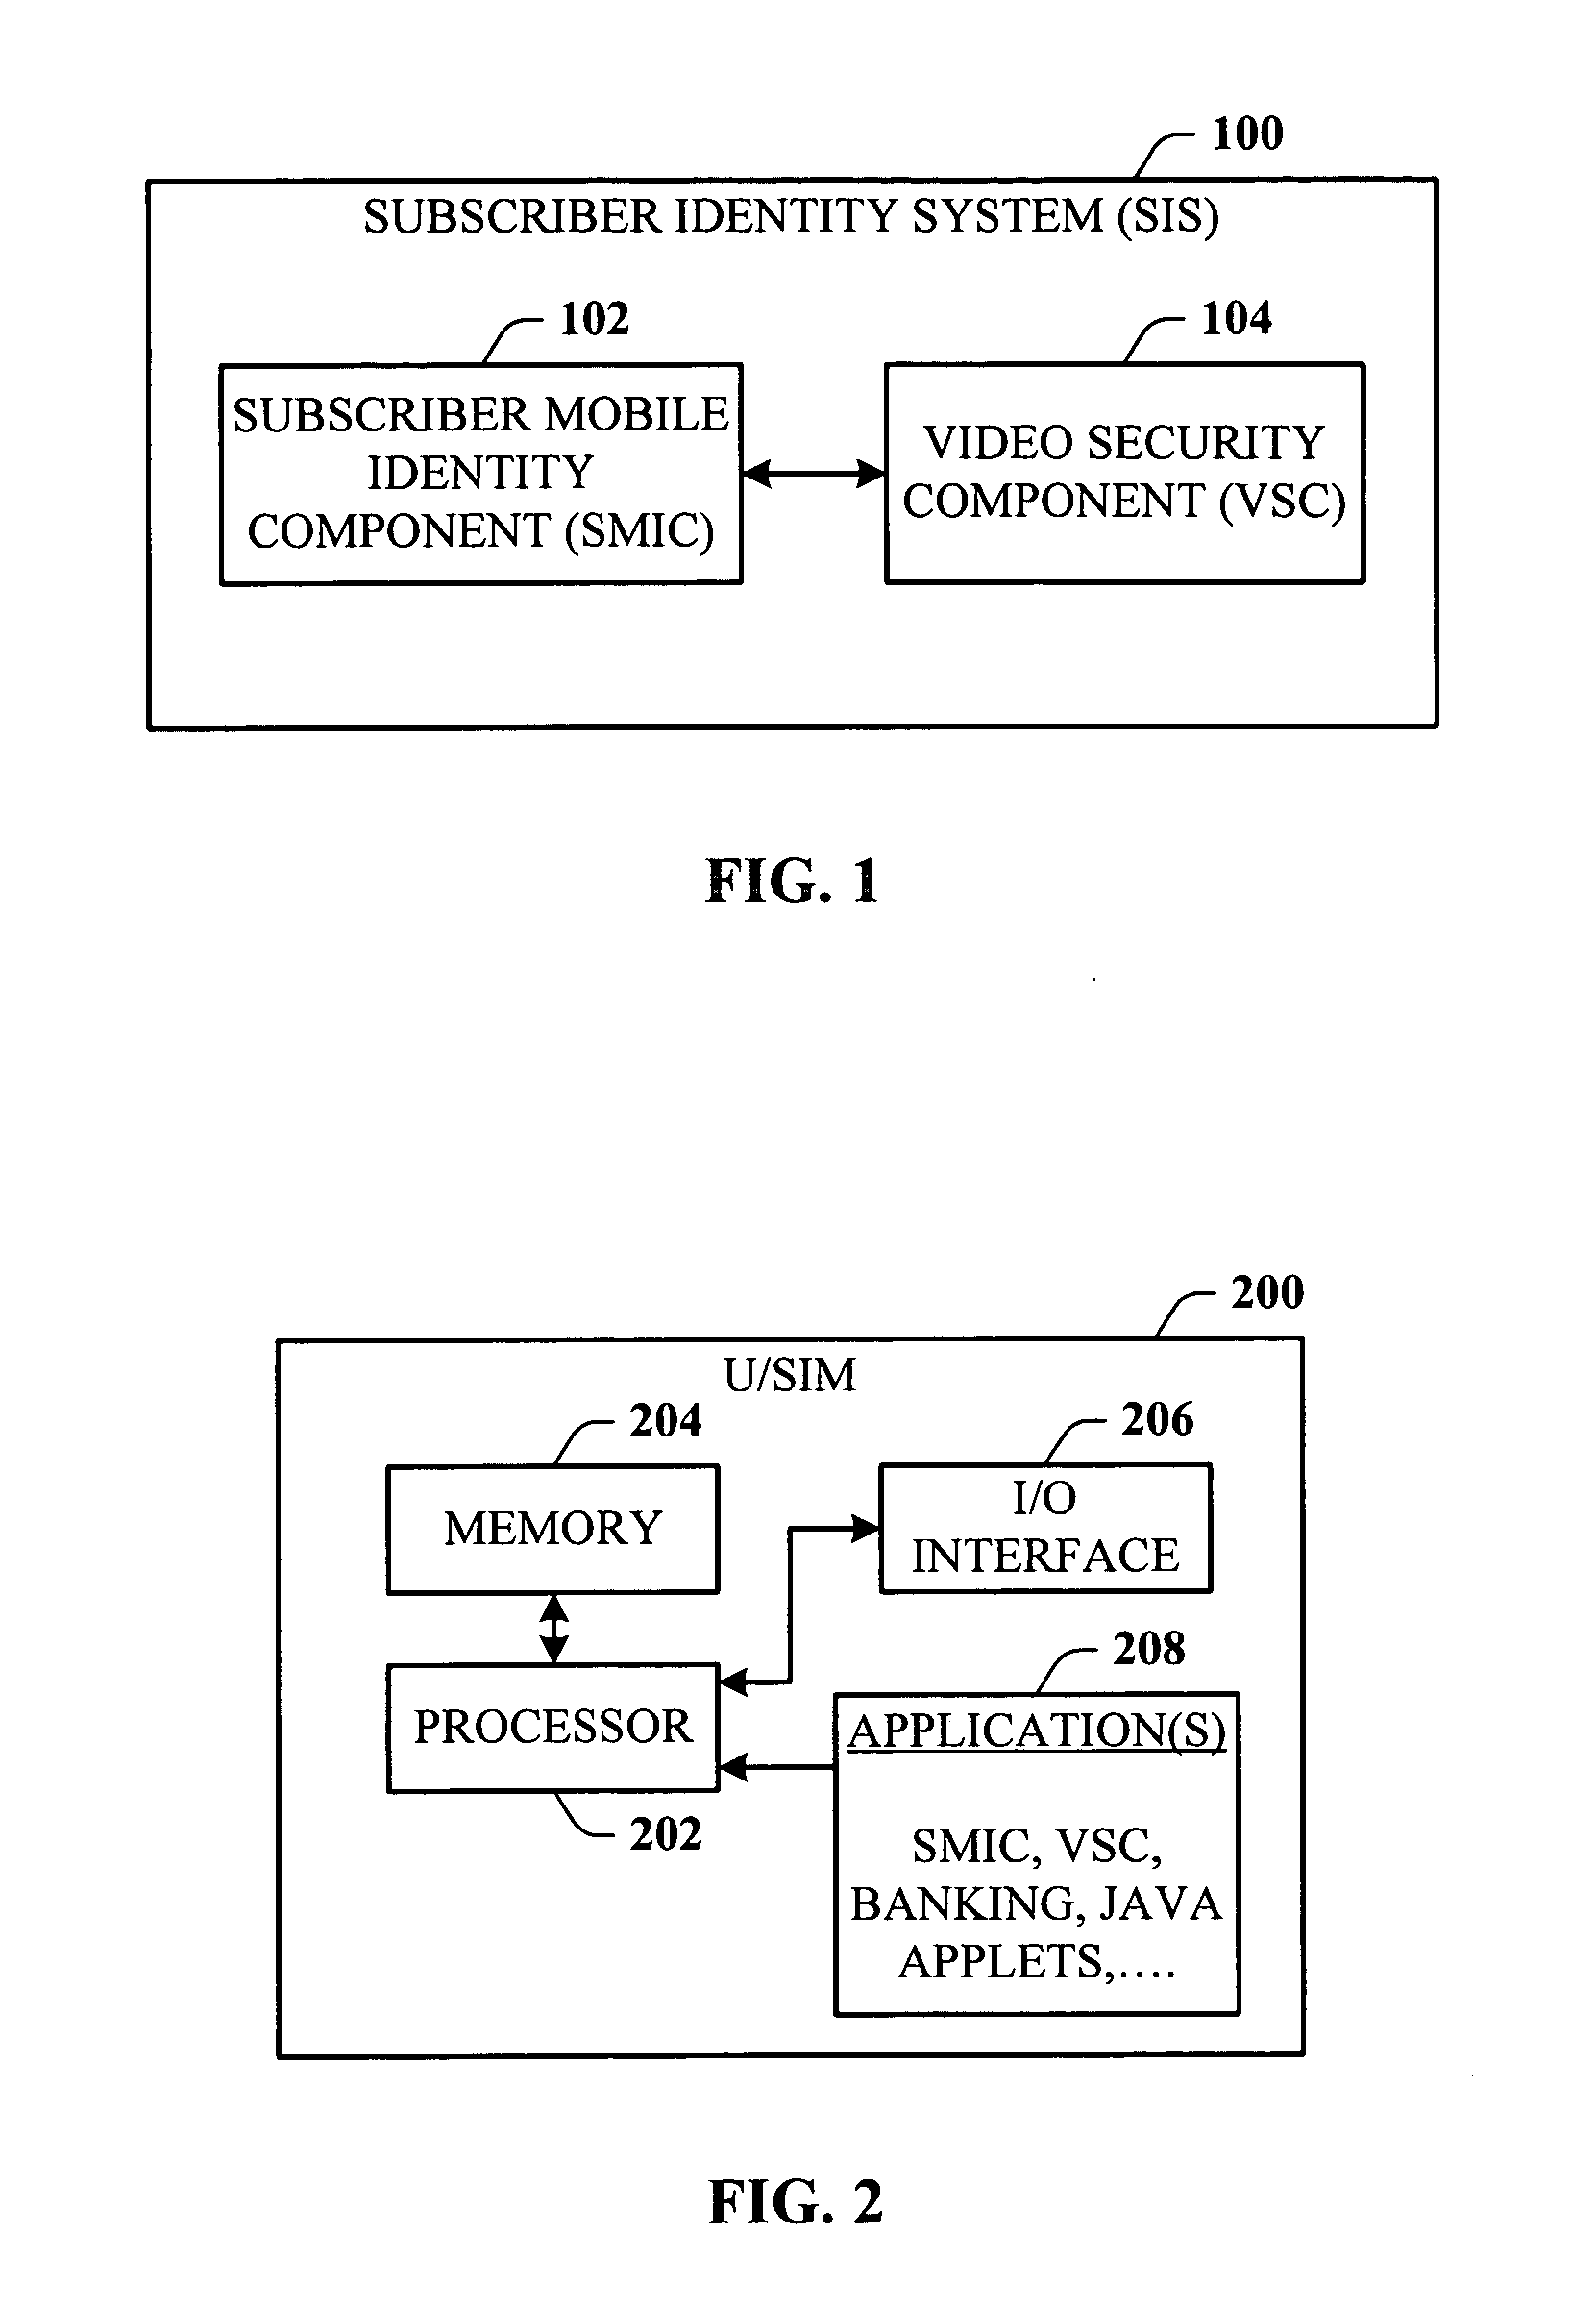 Personal base station system with wireless video capability